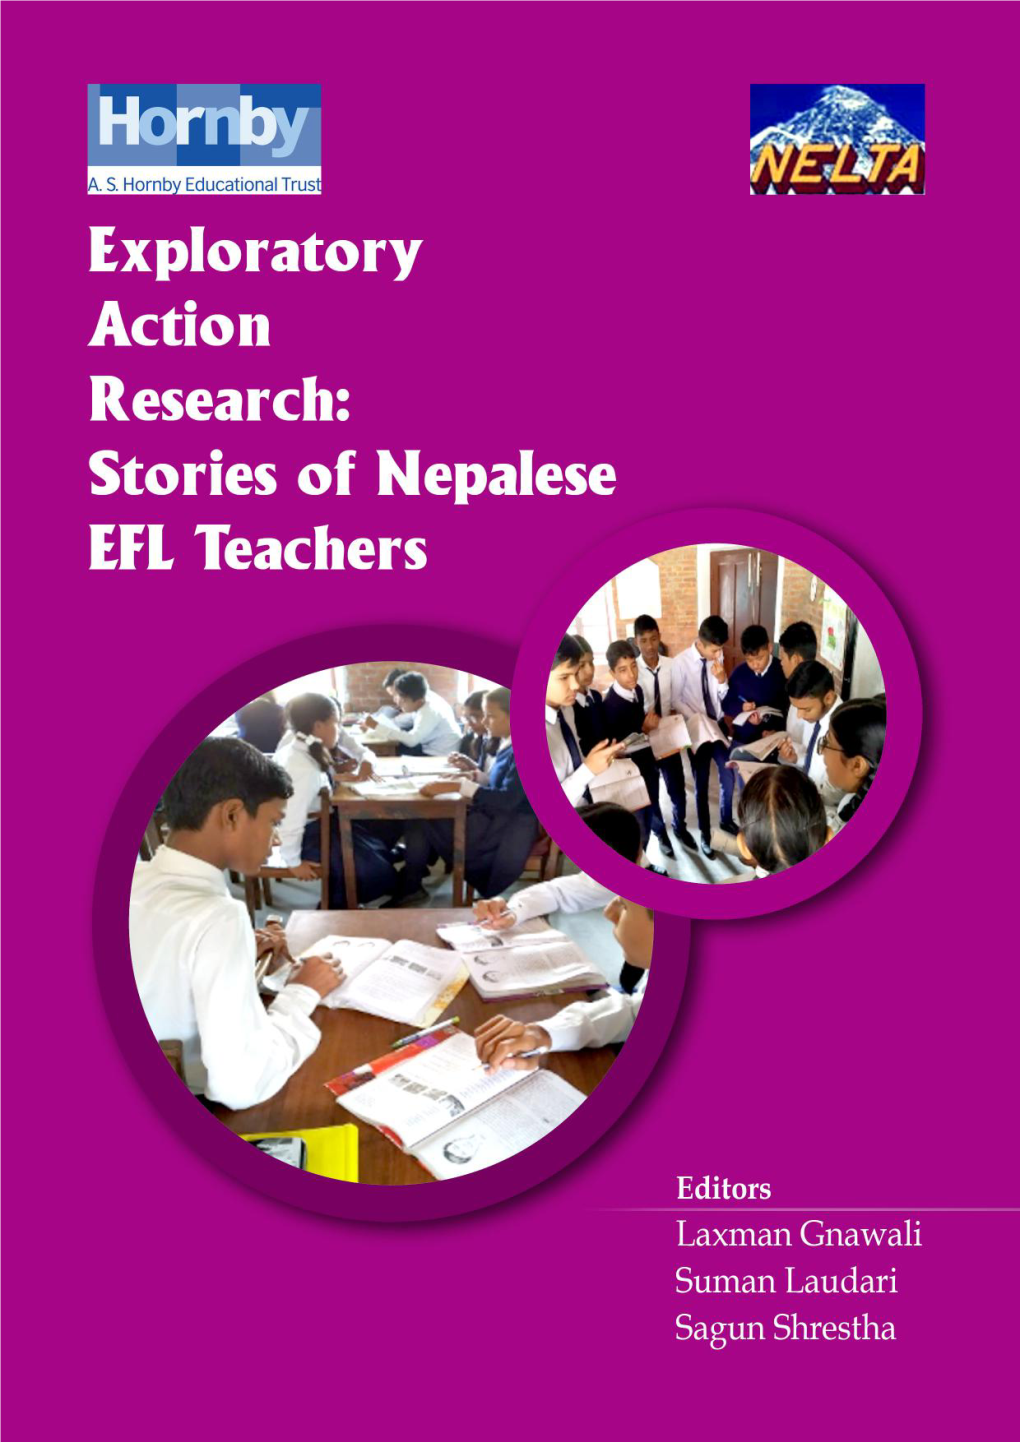 Exploratory Action Research: Stories of Nepalese EFL Teachers